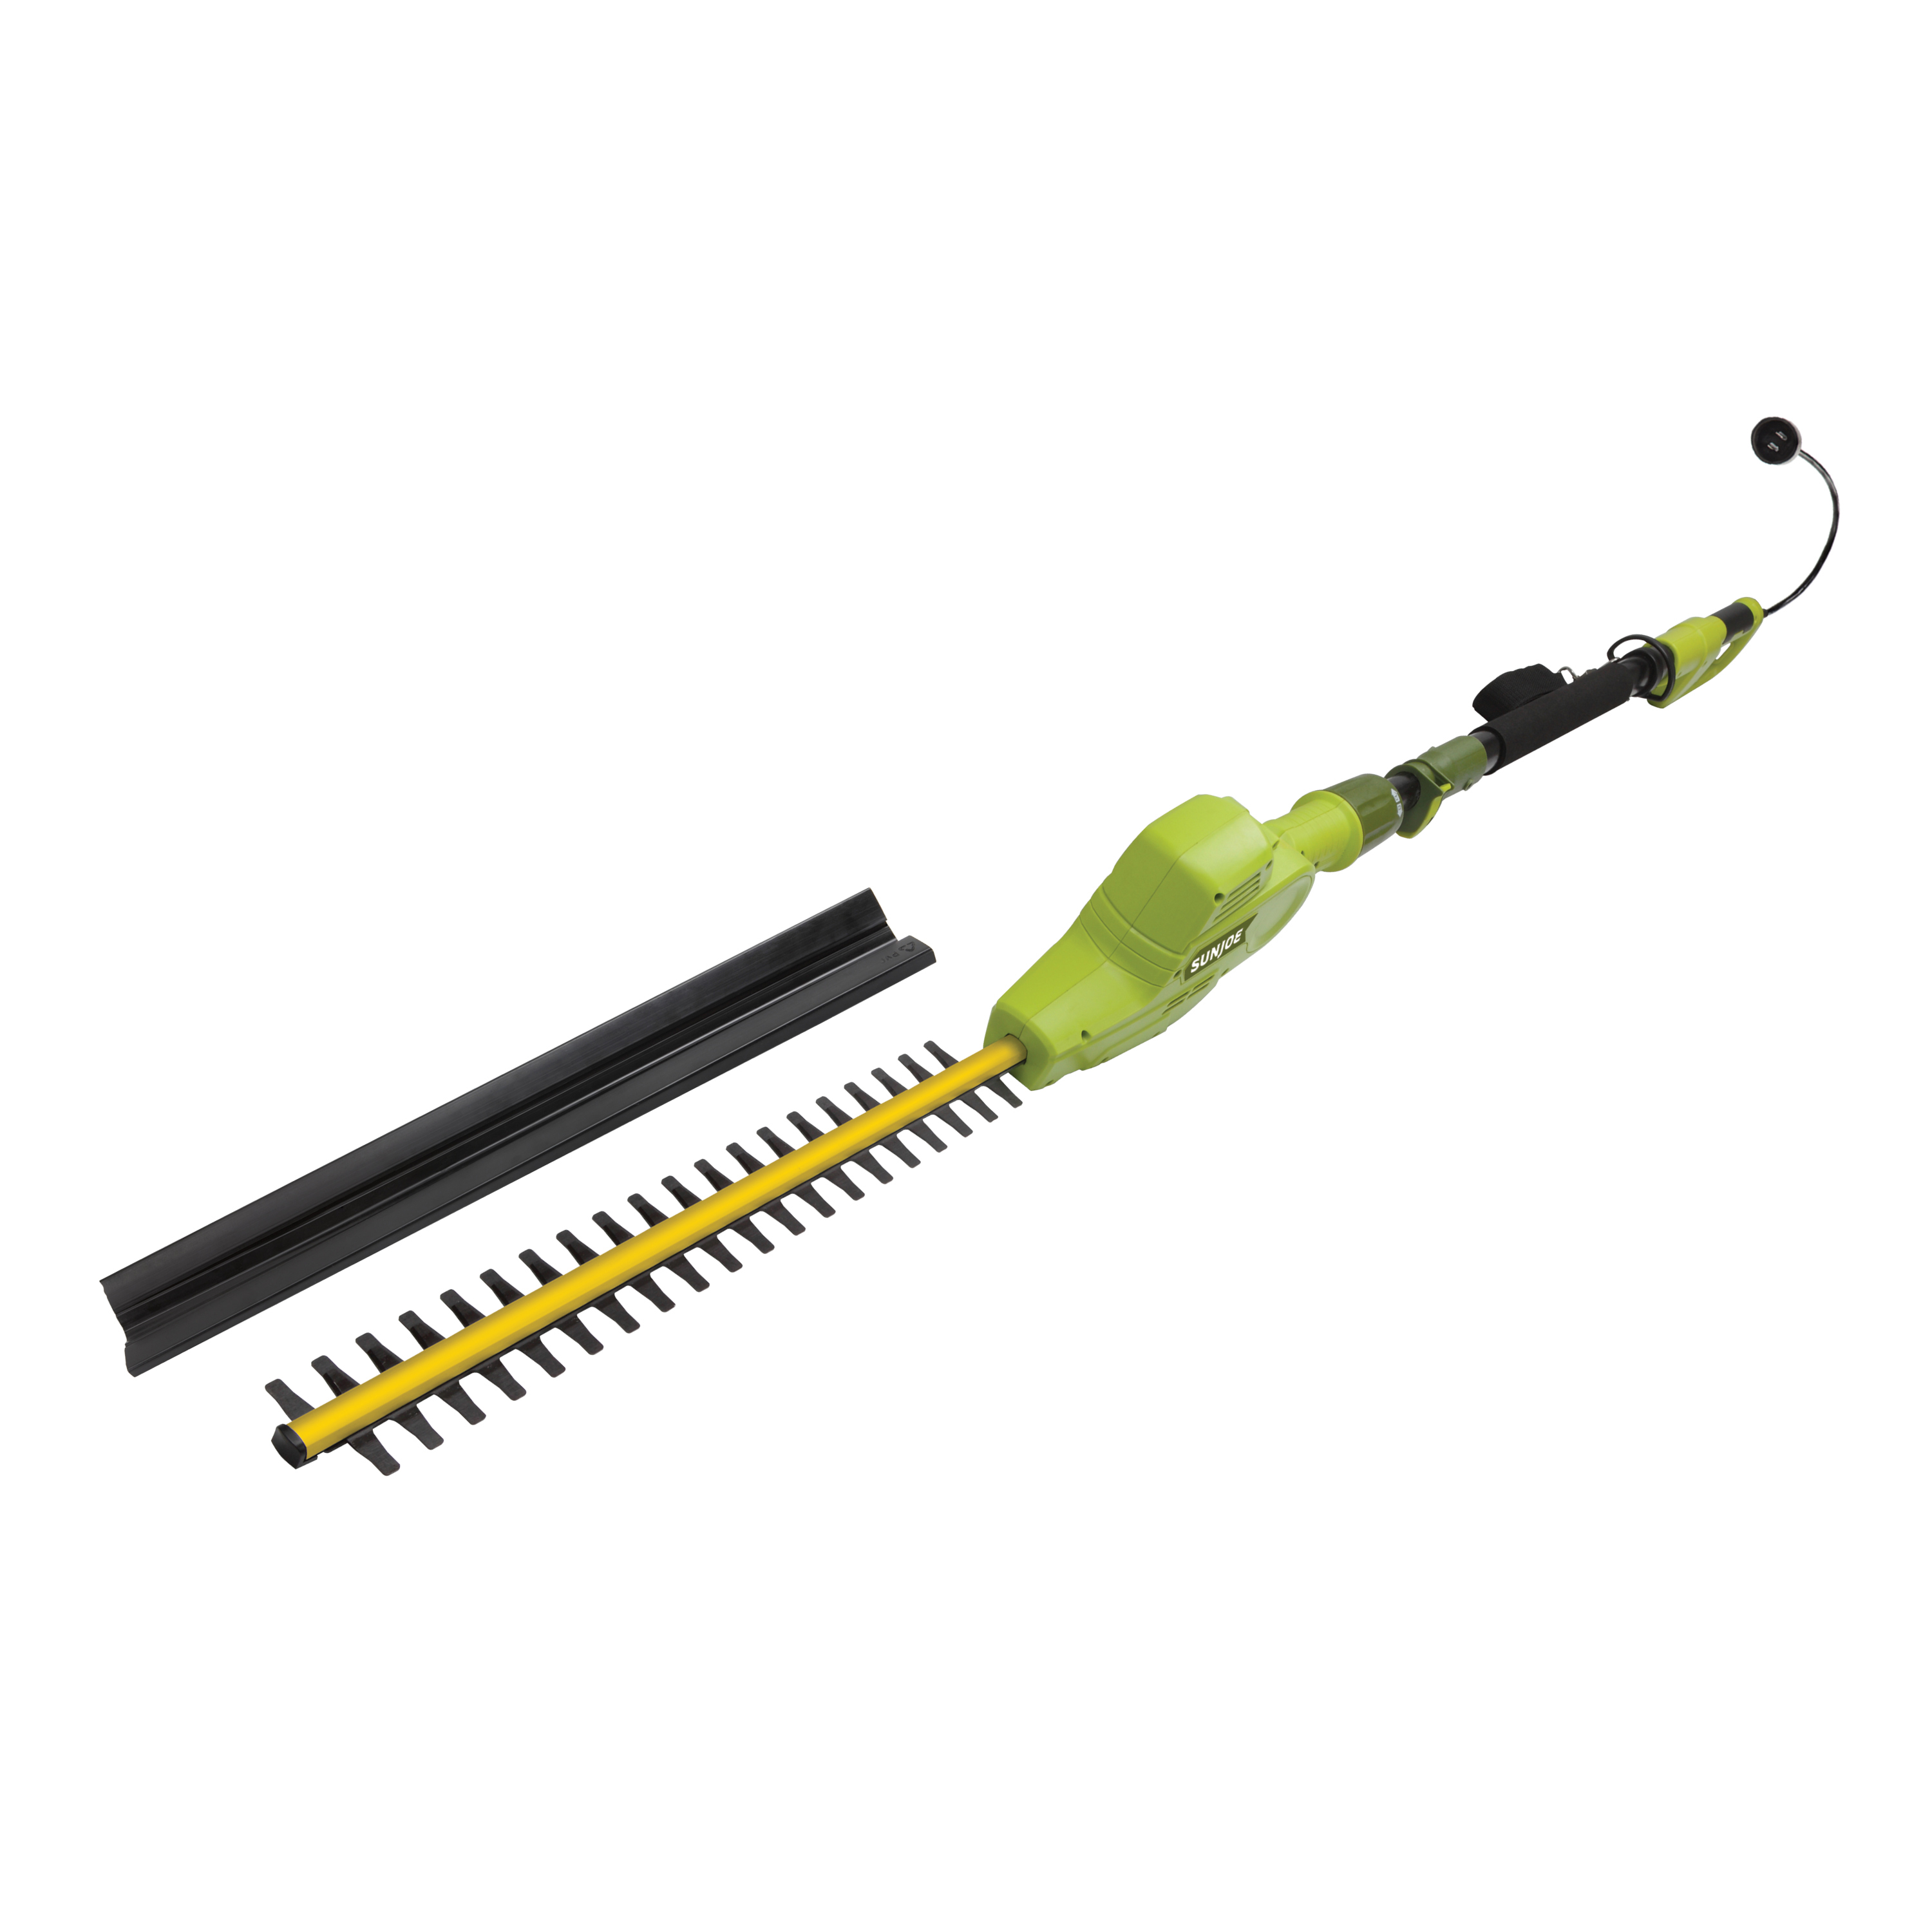 telescoping pole hedge trimmer